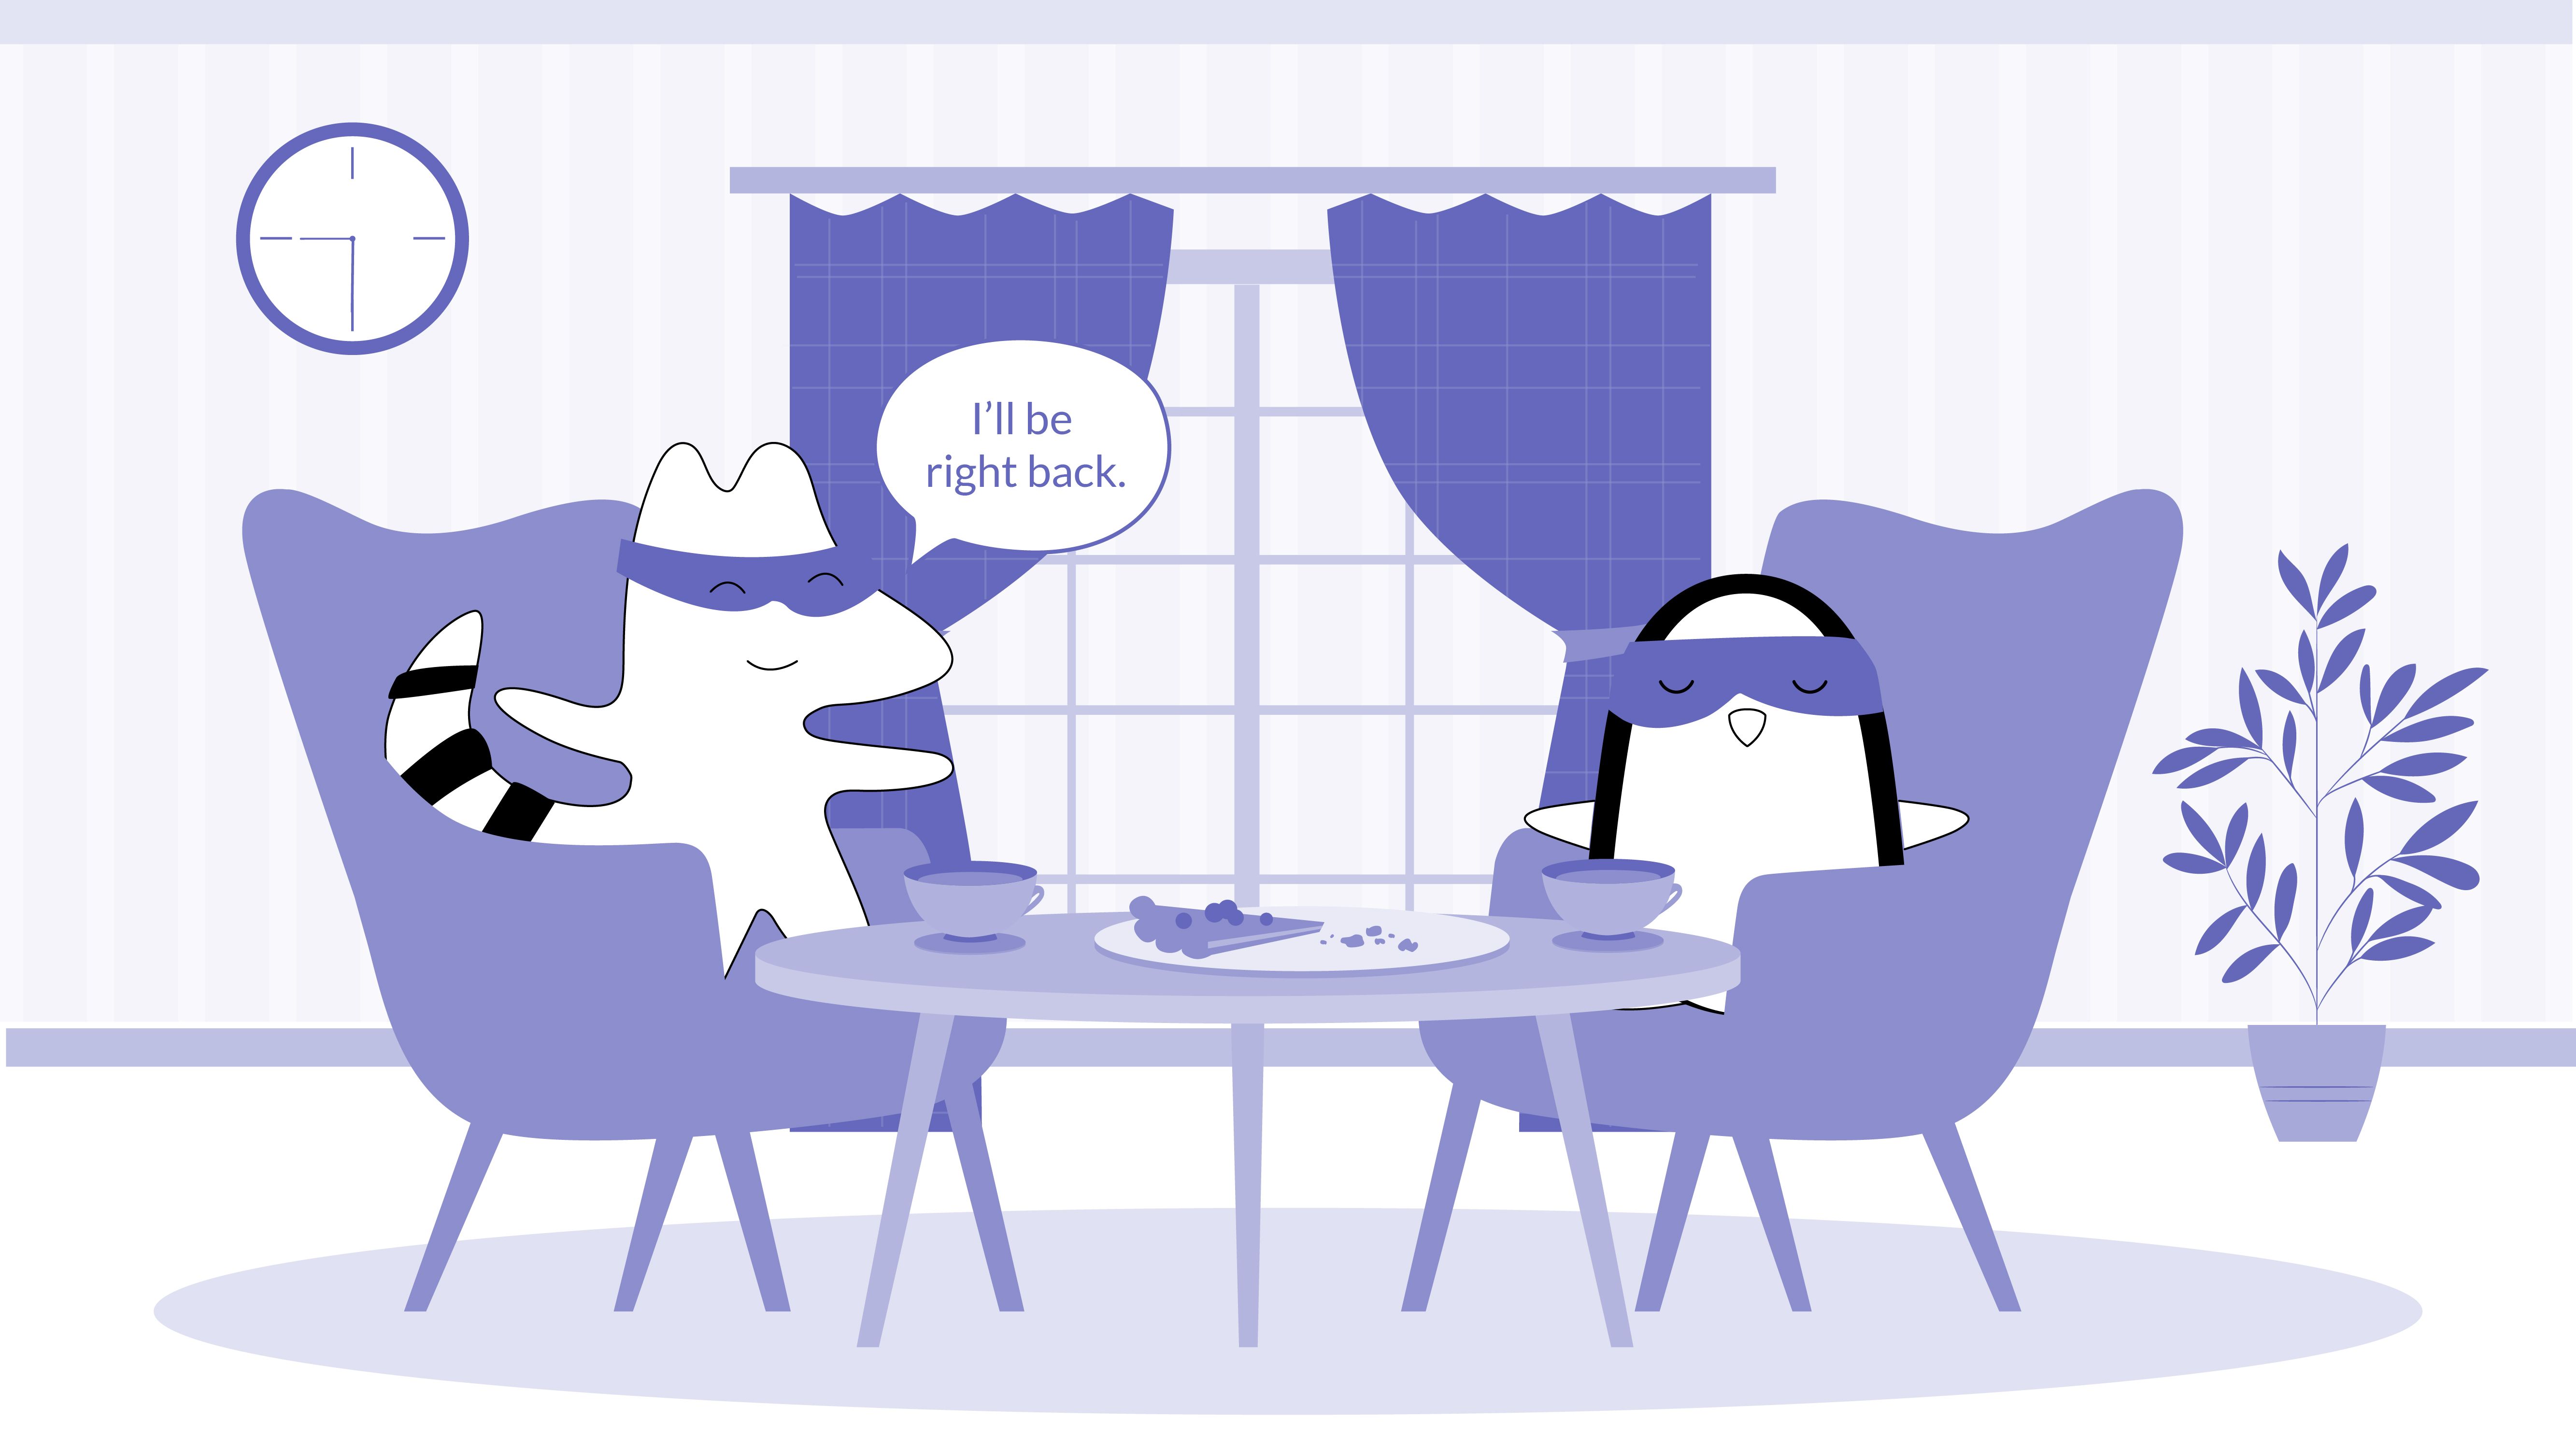 Iggy and Pocky are having dinner at the restaurant, Iggy says, “I’ll be right back.” It’s 9:30 pm on the clock.